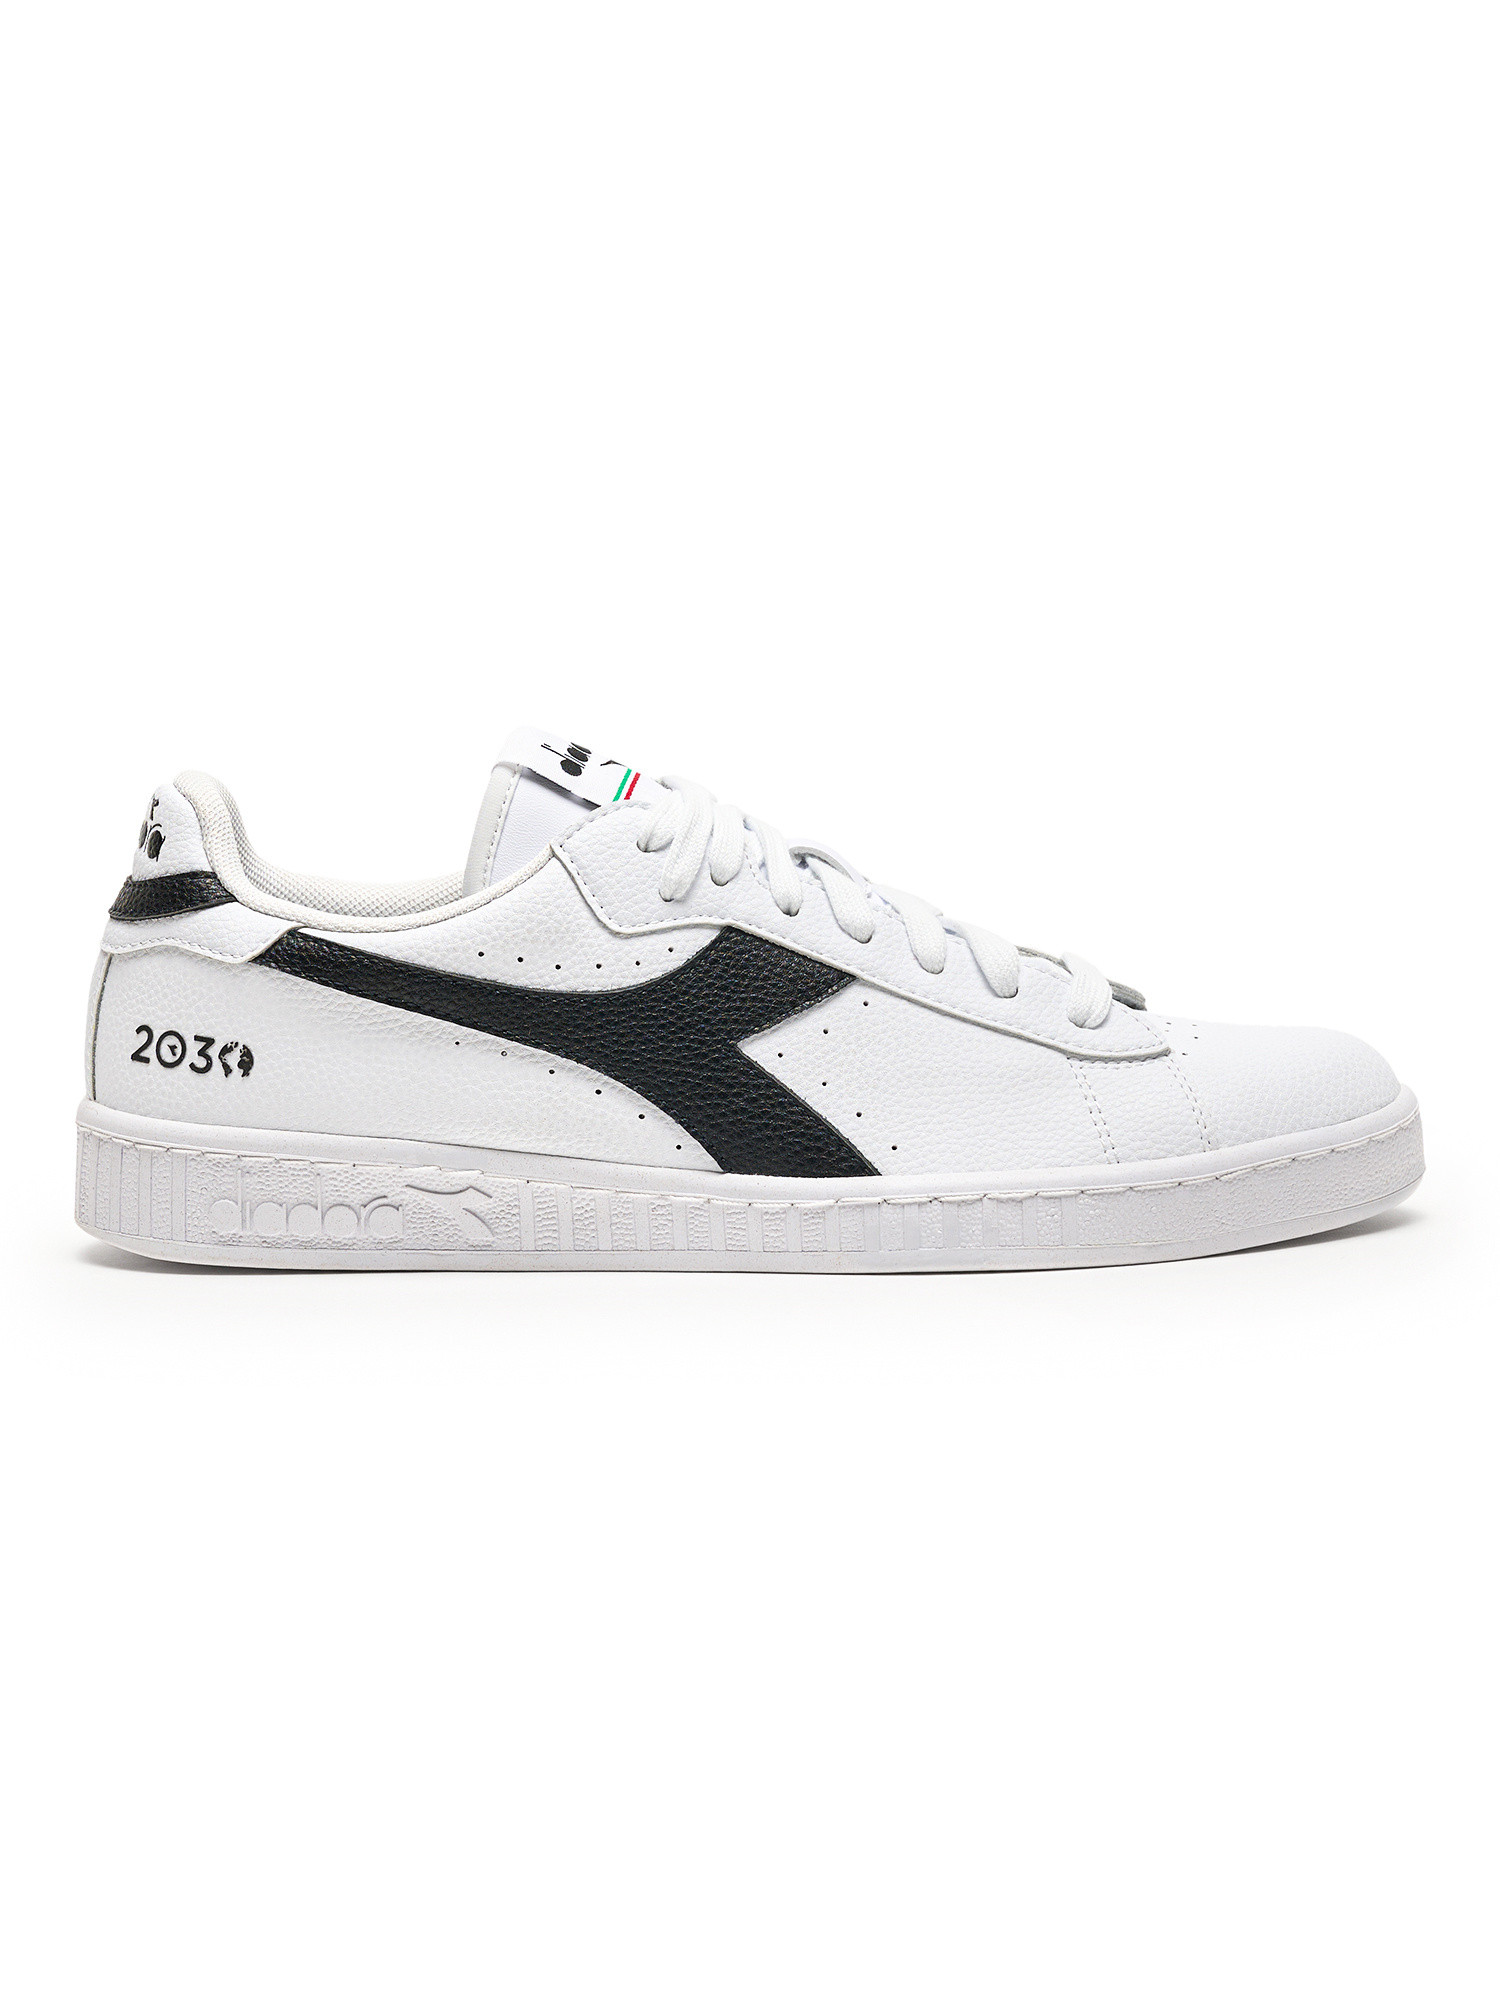 Diadora - Game L Low 2030 Shoes, White, large image number 0